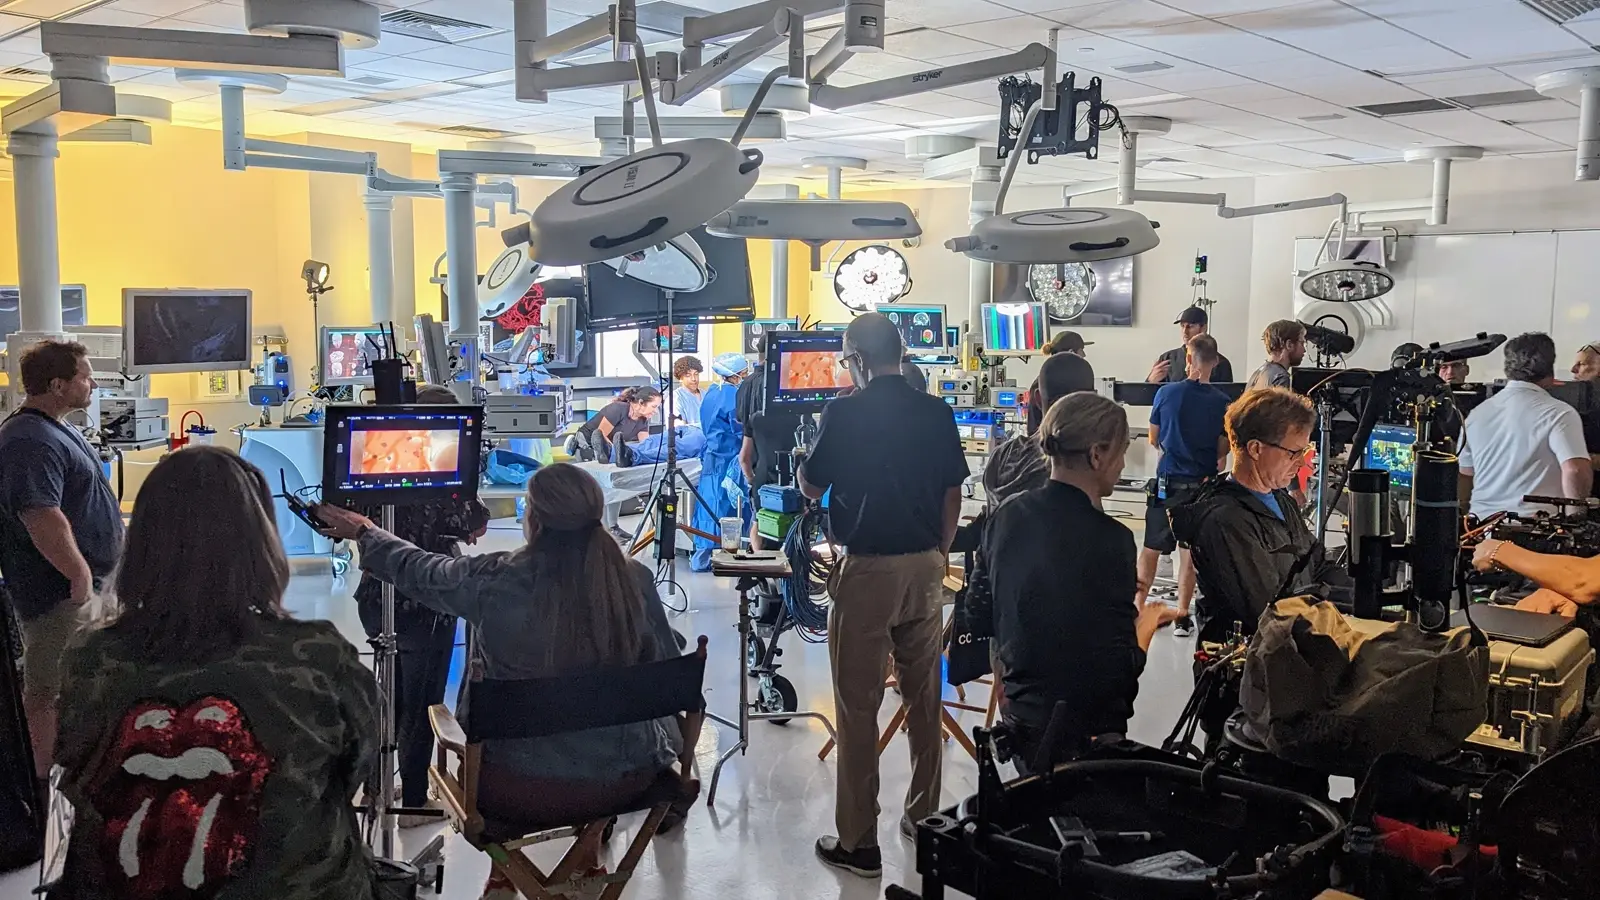 CAMLS A busy film crew is shooting a scene in a brightly-lit room filled with medical equipment, with multiple cameras and lighting rigs in use. Crew members are seen operating equipment, monitoring screens, and discussing the shot.